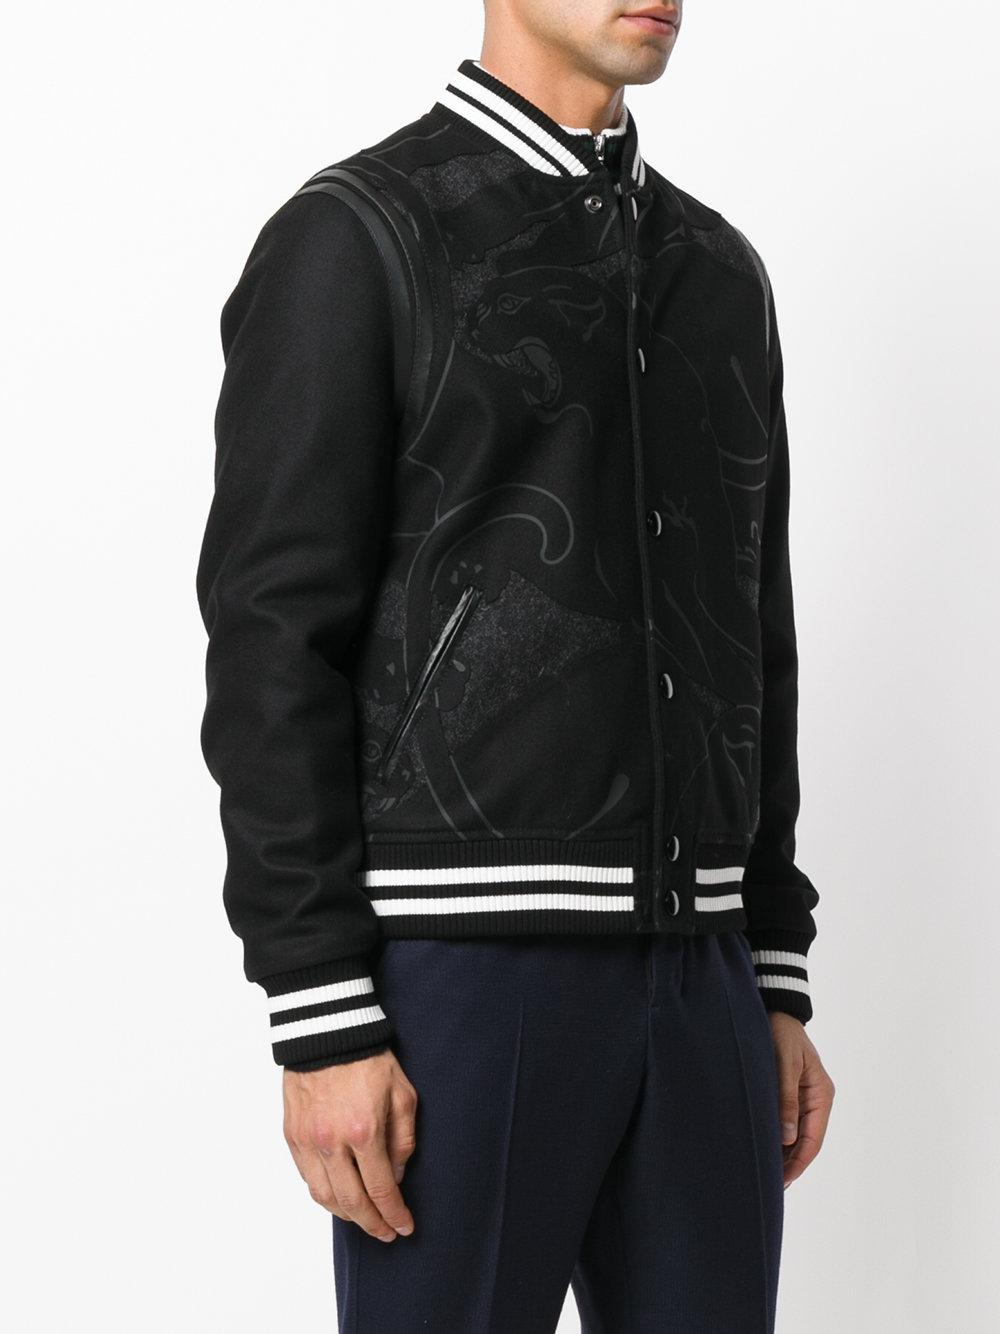 Lyst - Valentino Panther Print Bomber Jacket in Black for Men